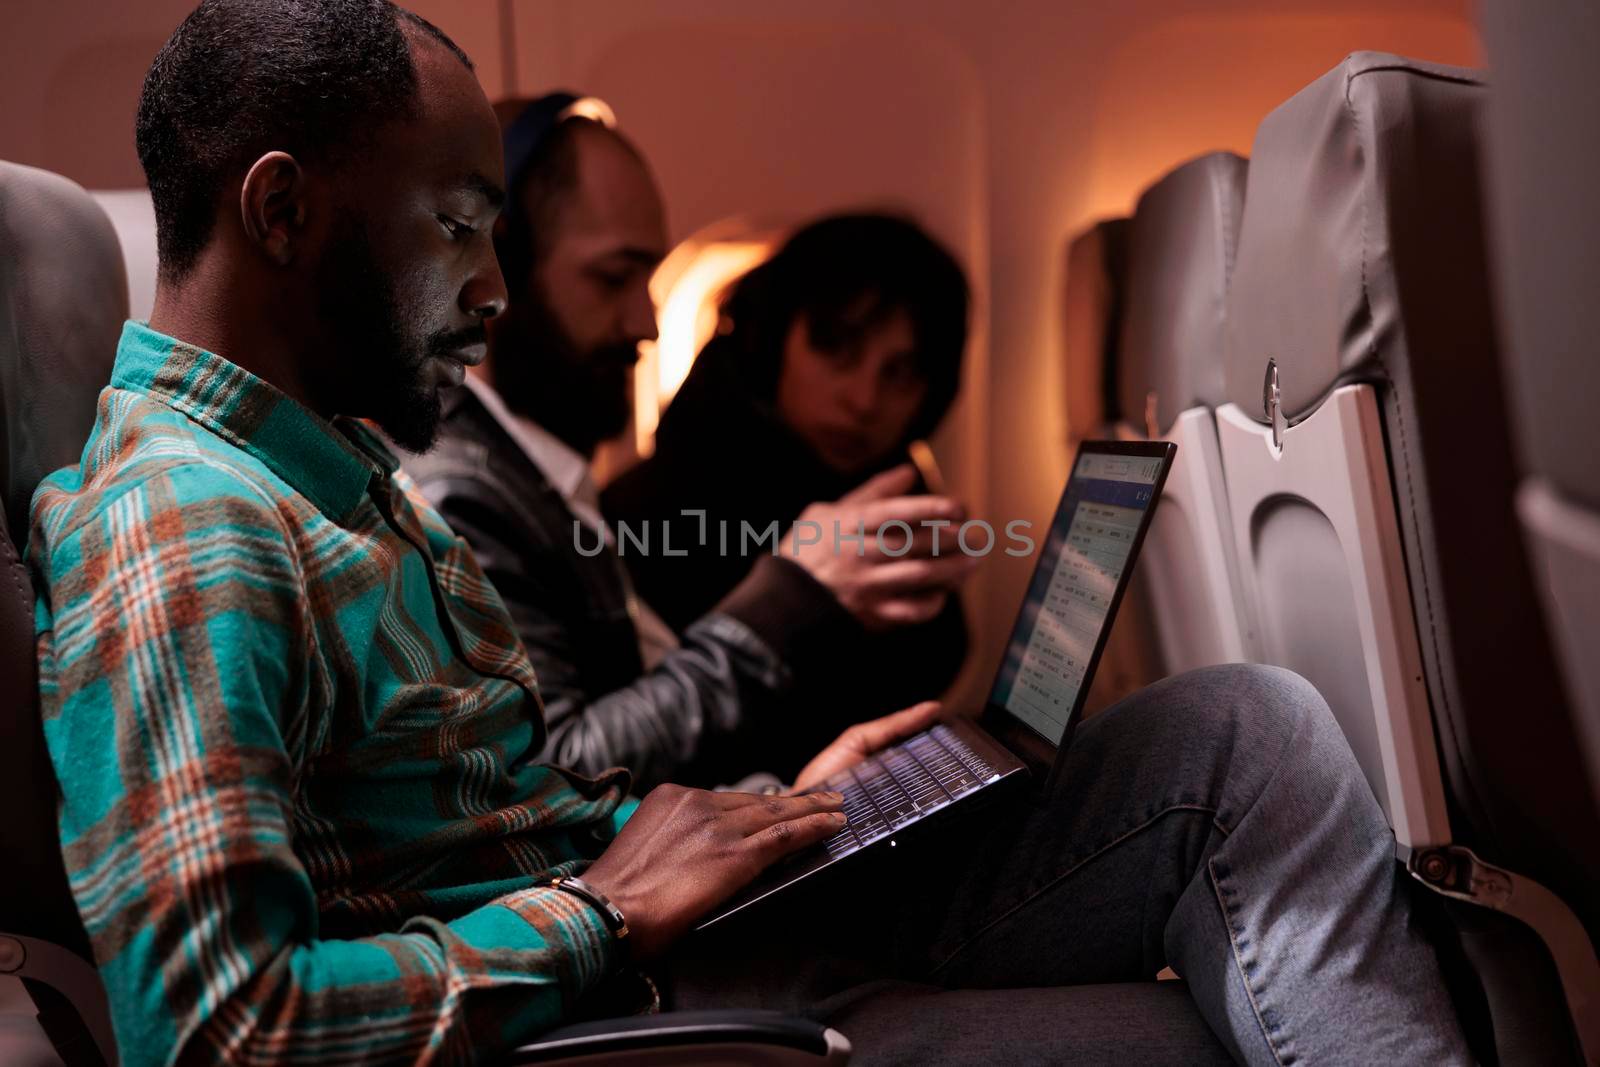 Male passenger travelling abroad by airplane on international flight, using airline service and aerial transportation. Freelancer using laptop computer during sunset in economy class.